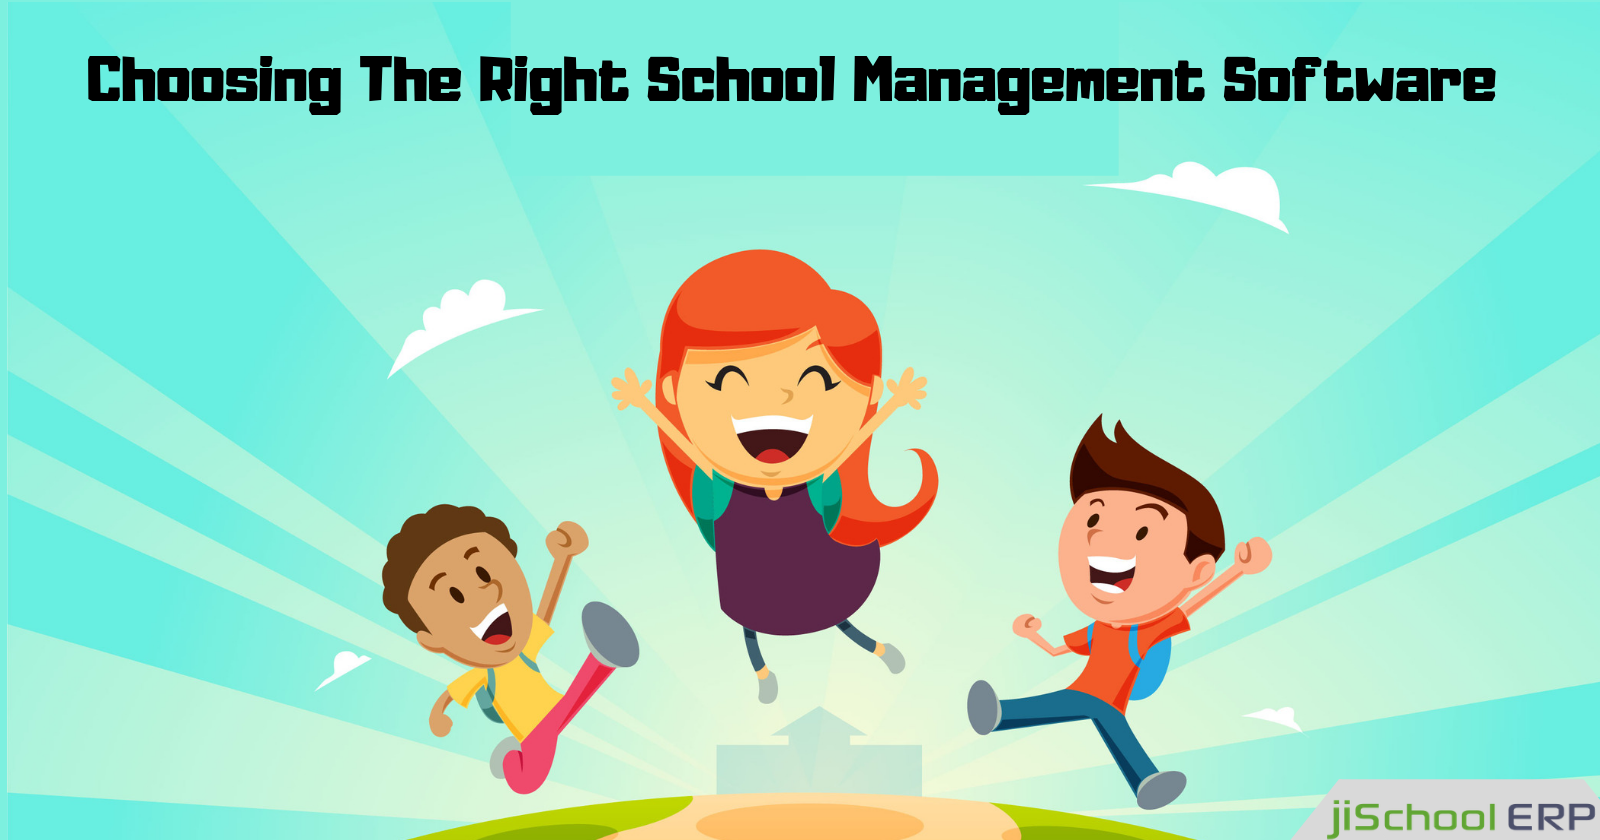 Follow These Tips To Choose The Right School Management Software